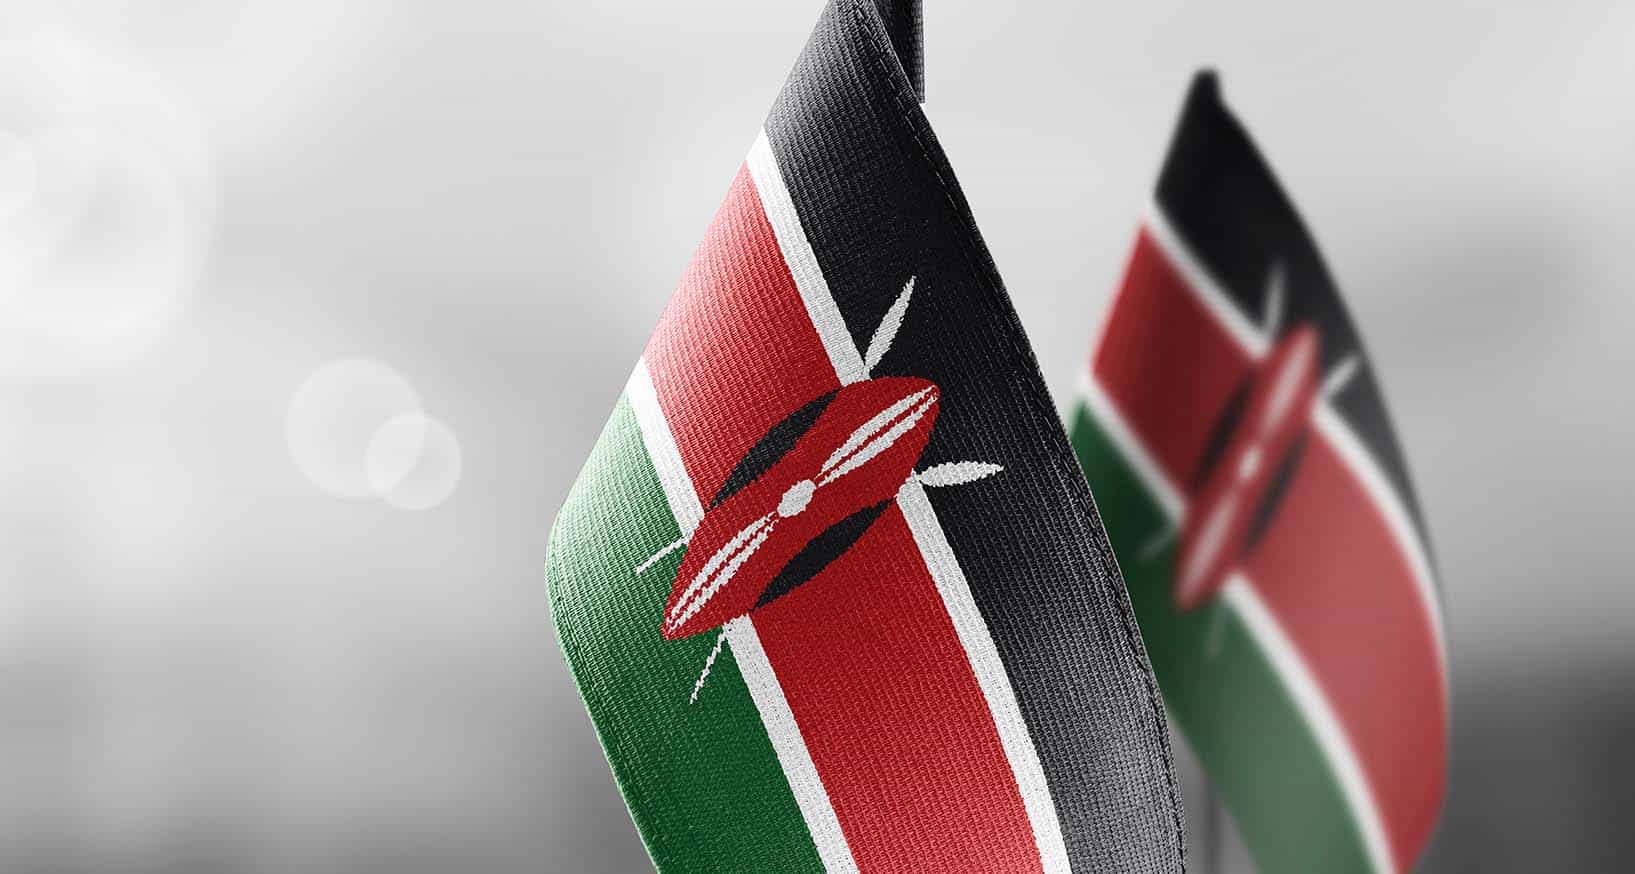 What’s Next? Geopolitical Forecasting the Kenyan Election